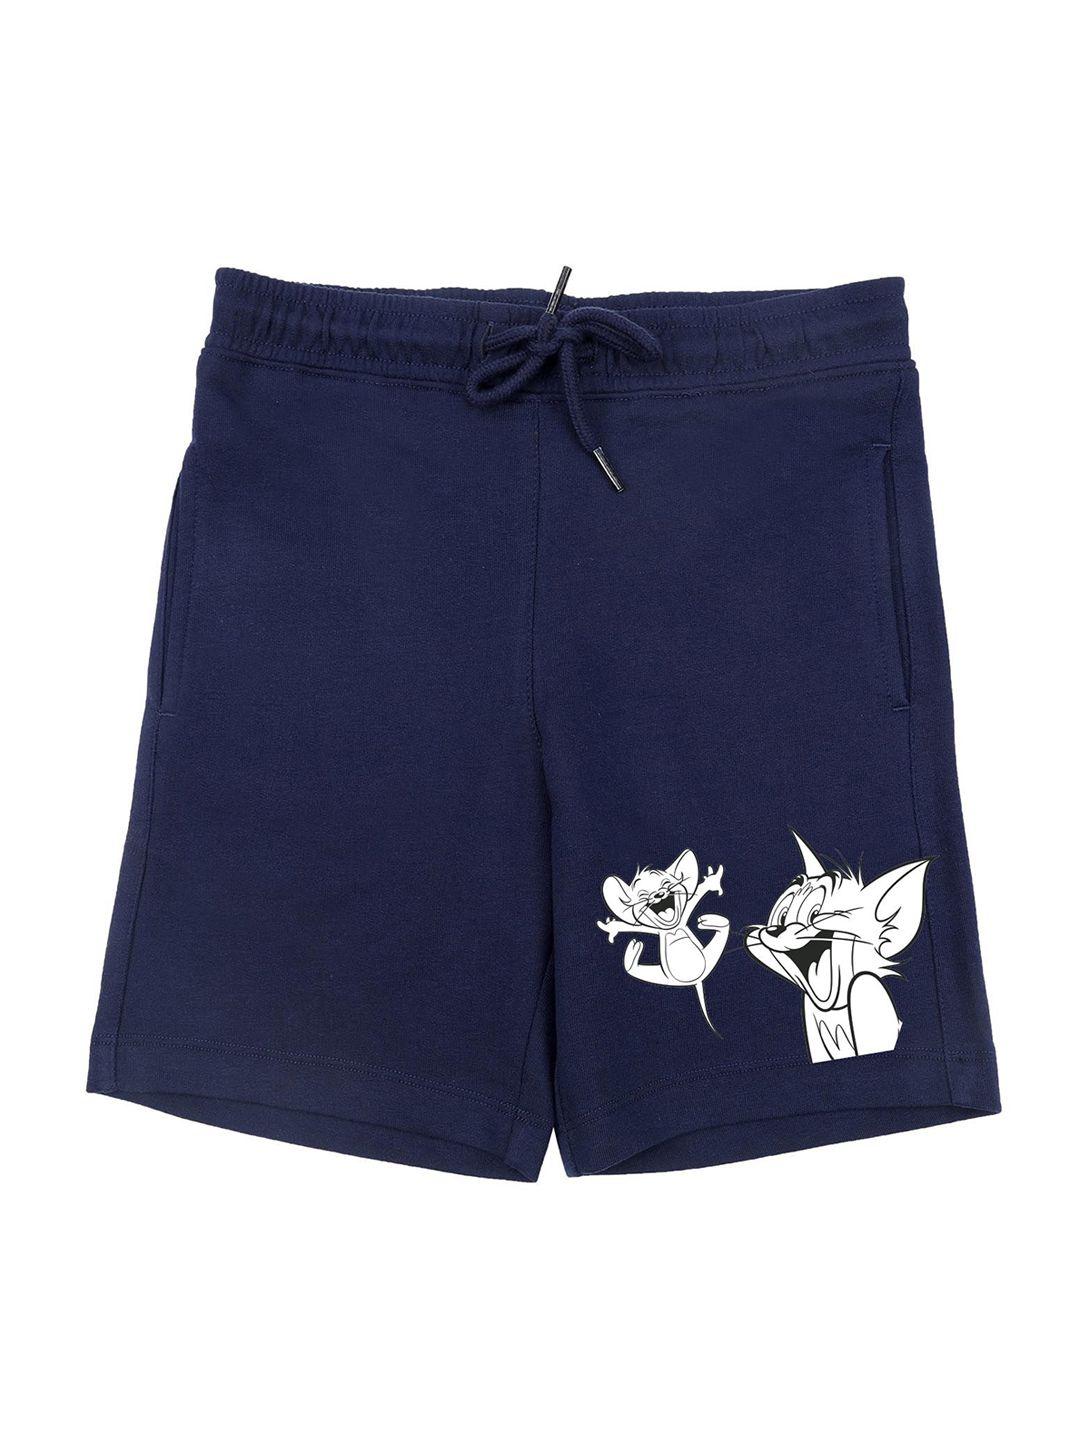 tom & jerry by wear your mind boys navy blue tom & jerry shorts